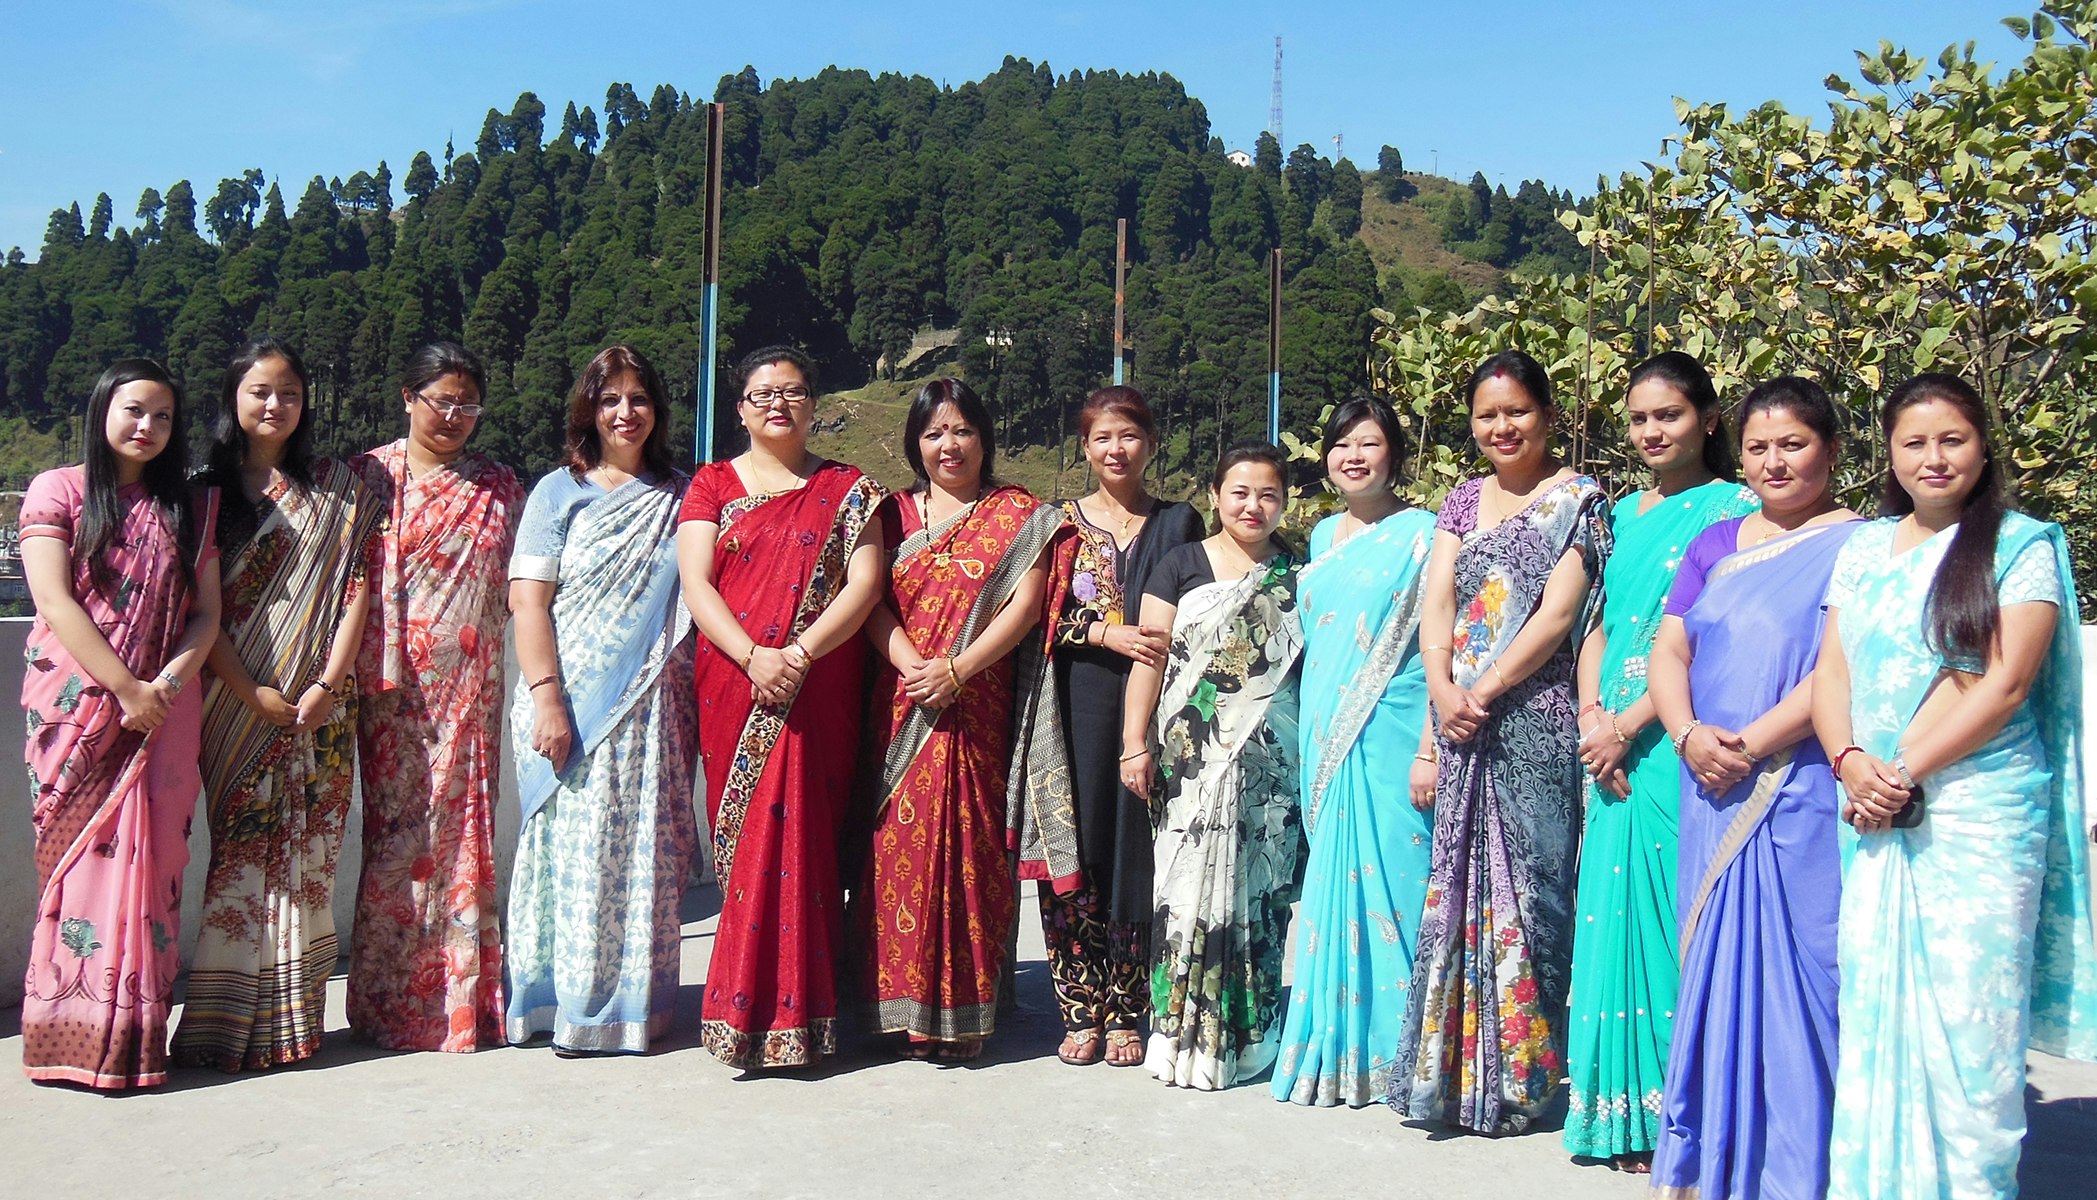 Radiant Elegance: Our lady teachers donning vibrant traditional saris, bring a splash of colour to the school grounds. Against the backdrop of the majestic Jalapahar ridge adorned with lush green trees, they embody grace and inspire with their dedication to education.